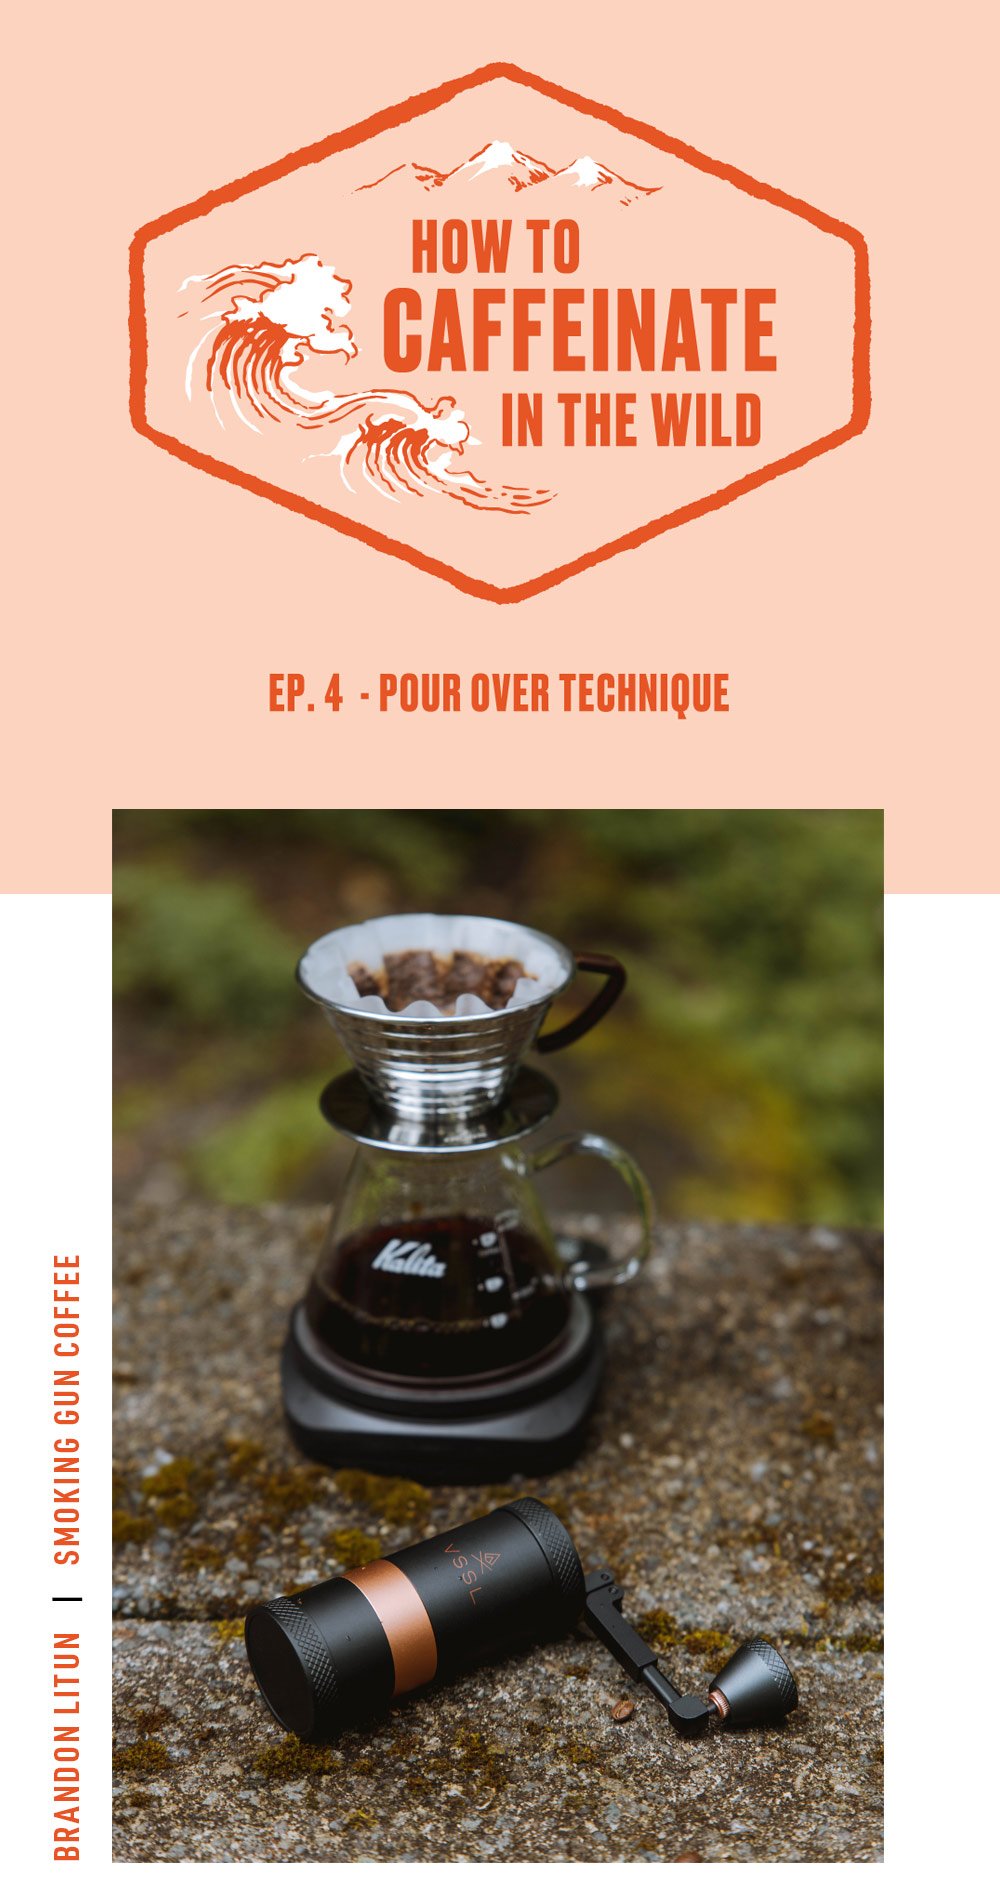 How to Caffeinate in the Wild - Episode 4 (Pour Over)